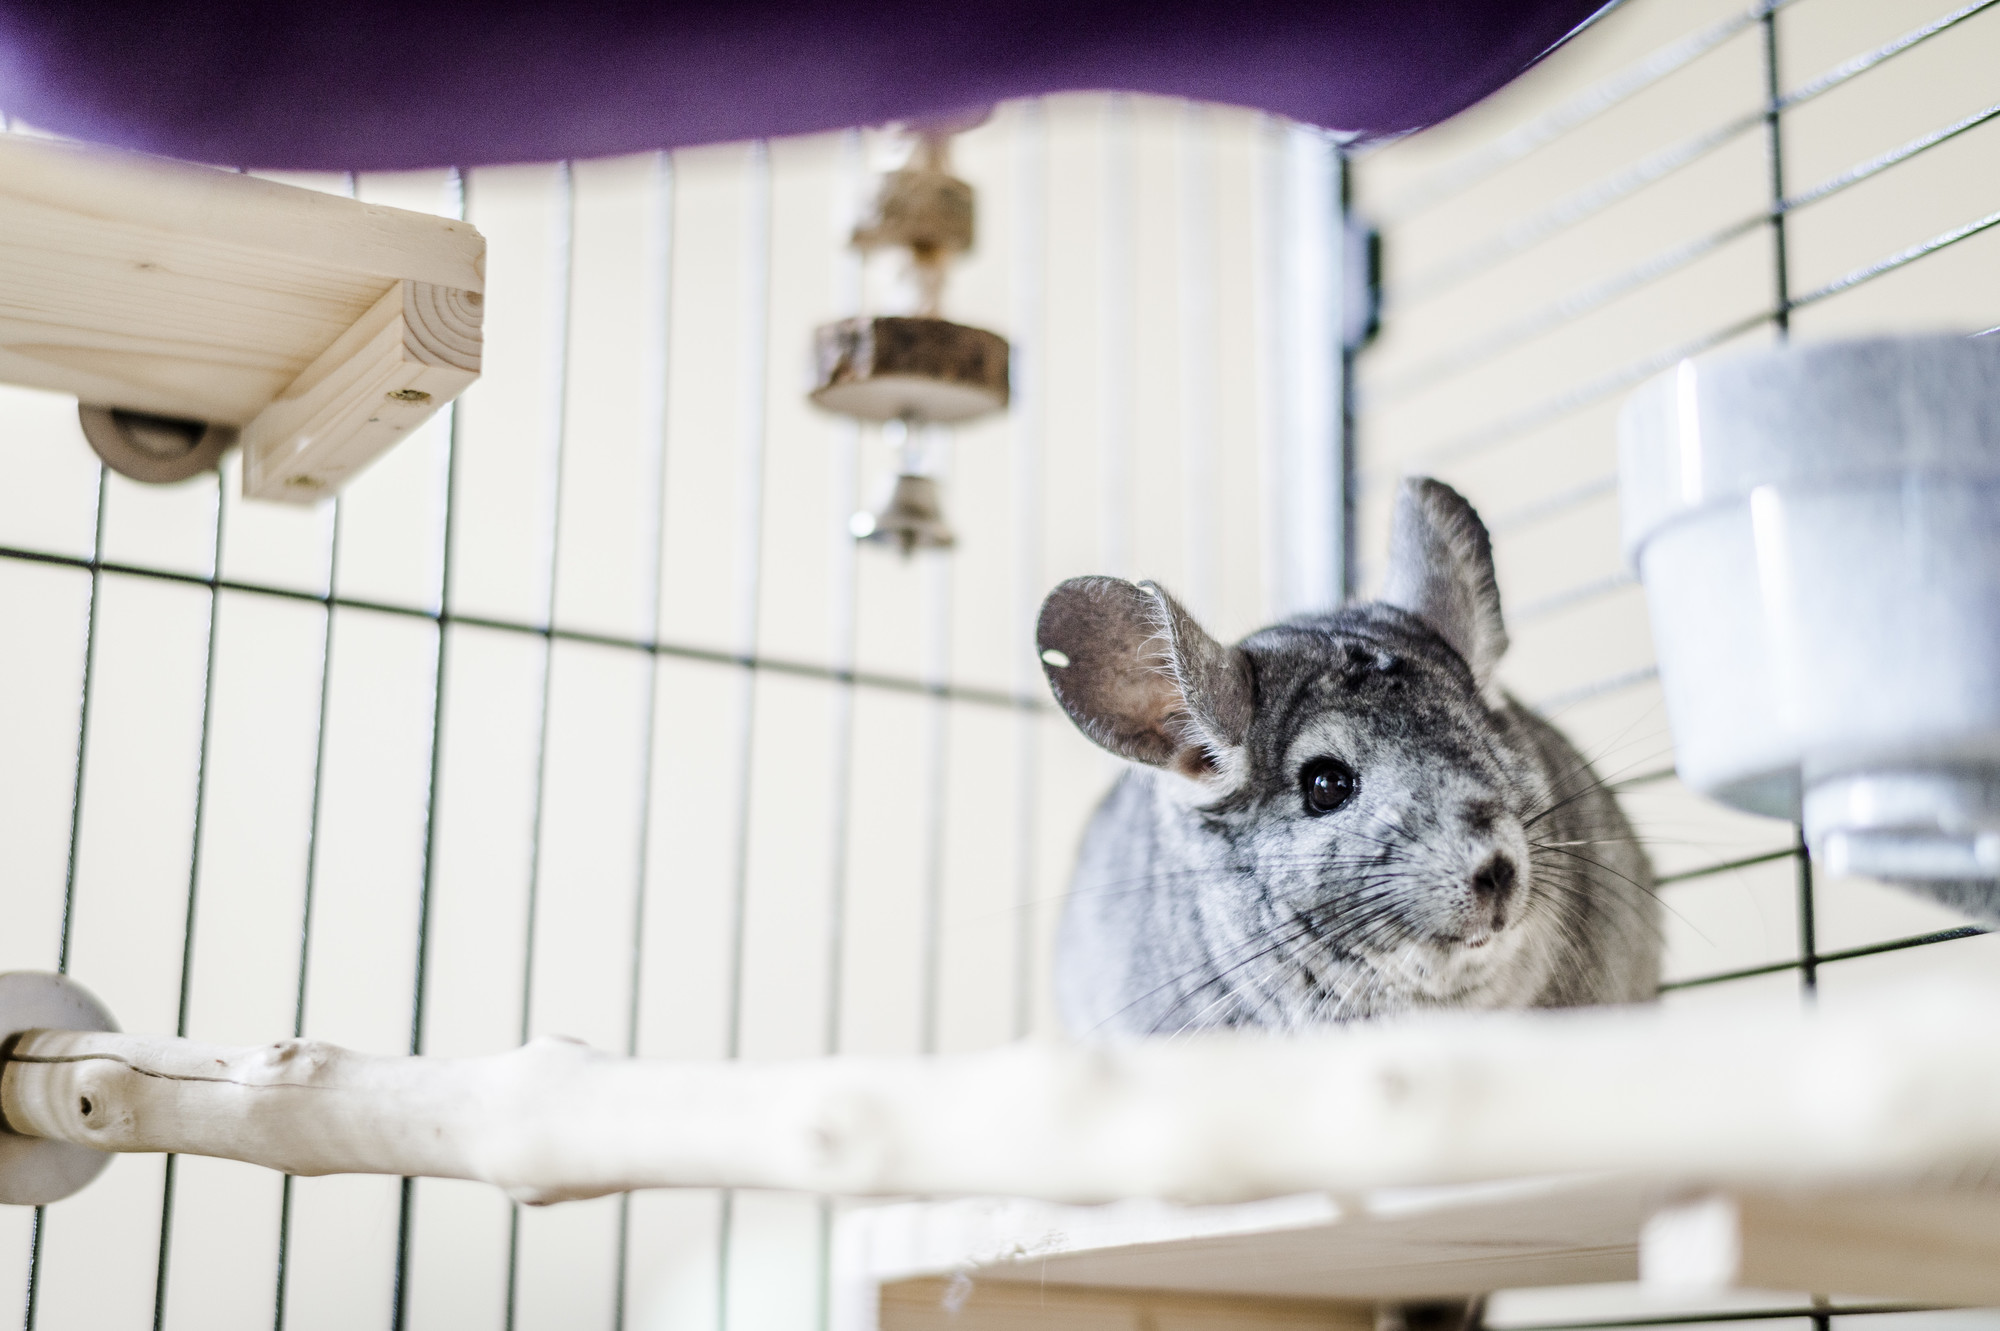 A grey chinchilla in their accommodation, surrounded by wooden toys.